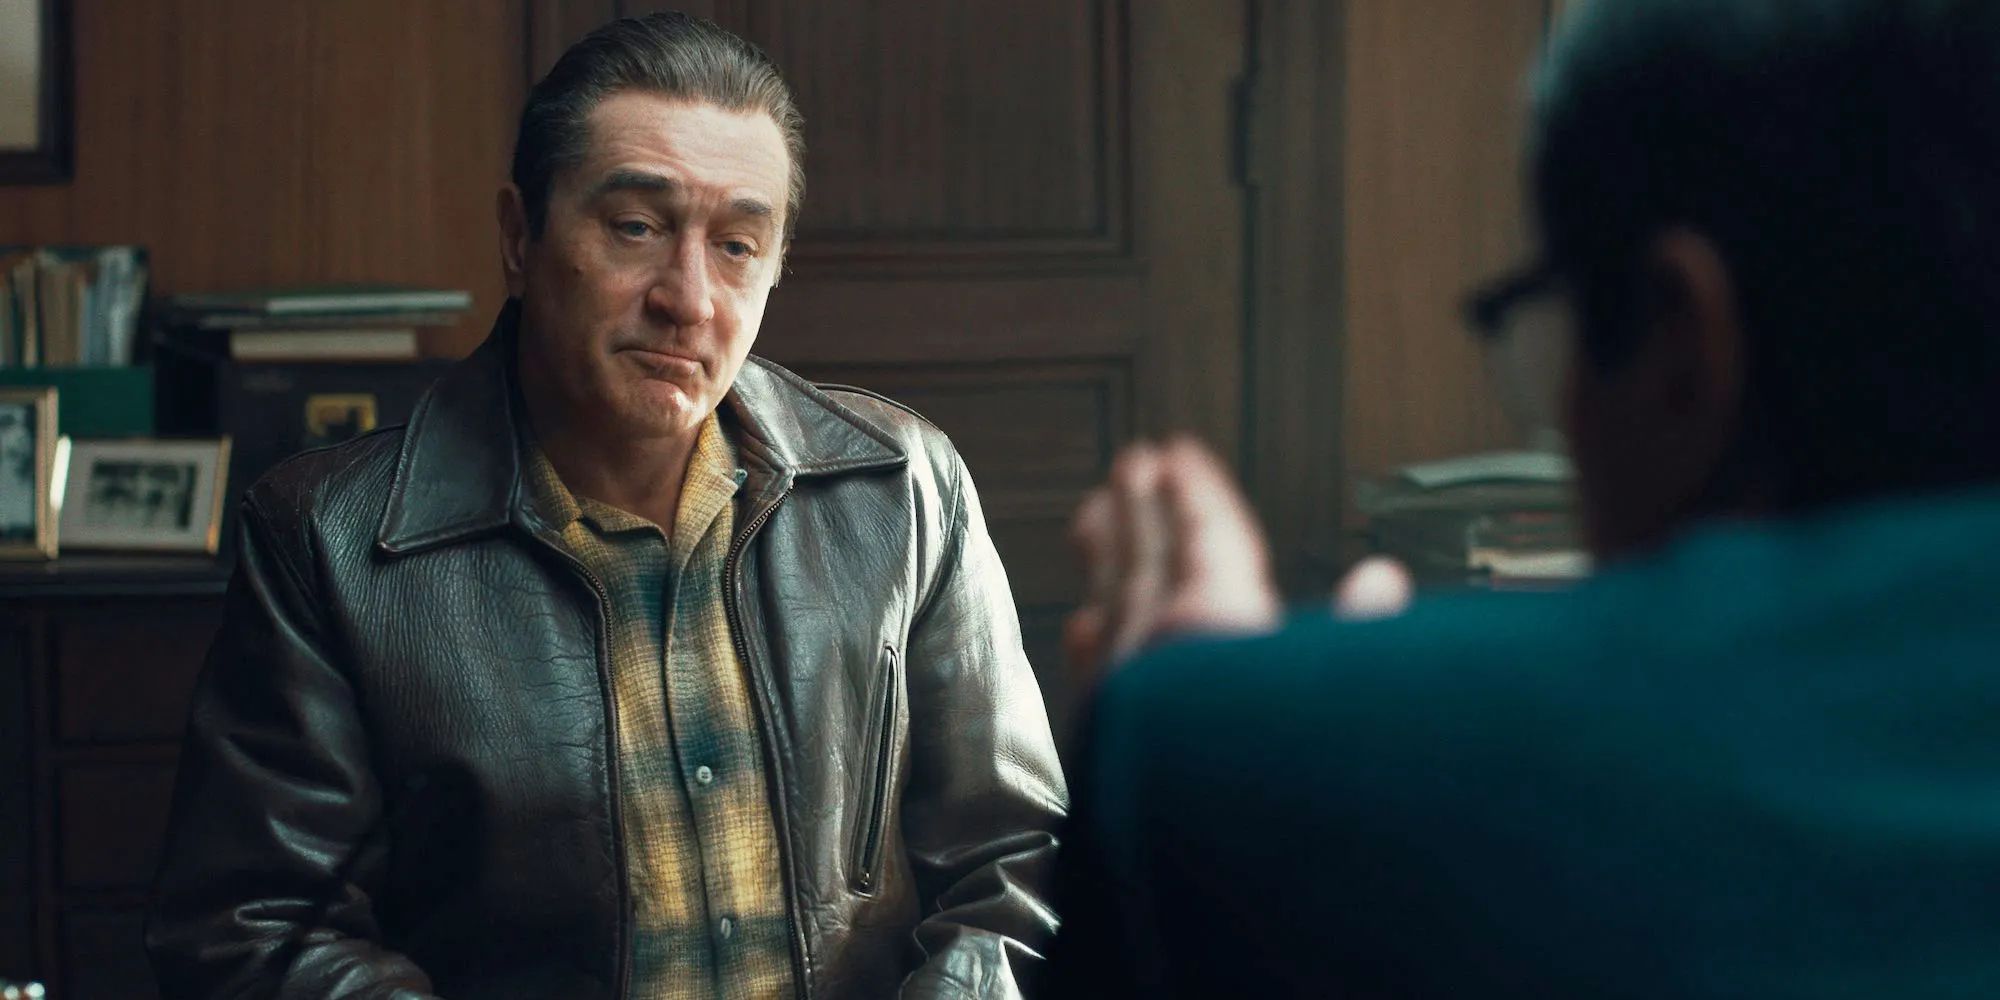 Frank Sheehan talking to someone with their back to the camera in The Irishman